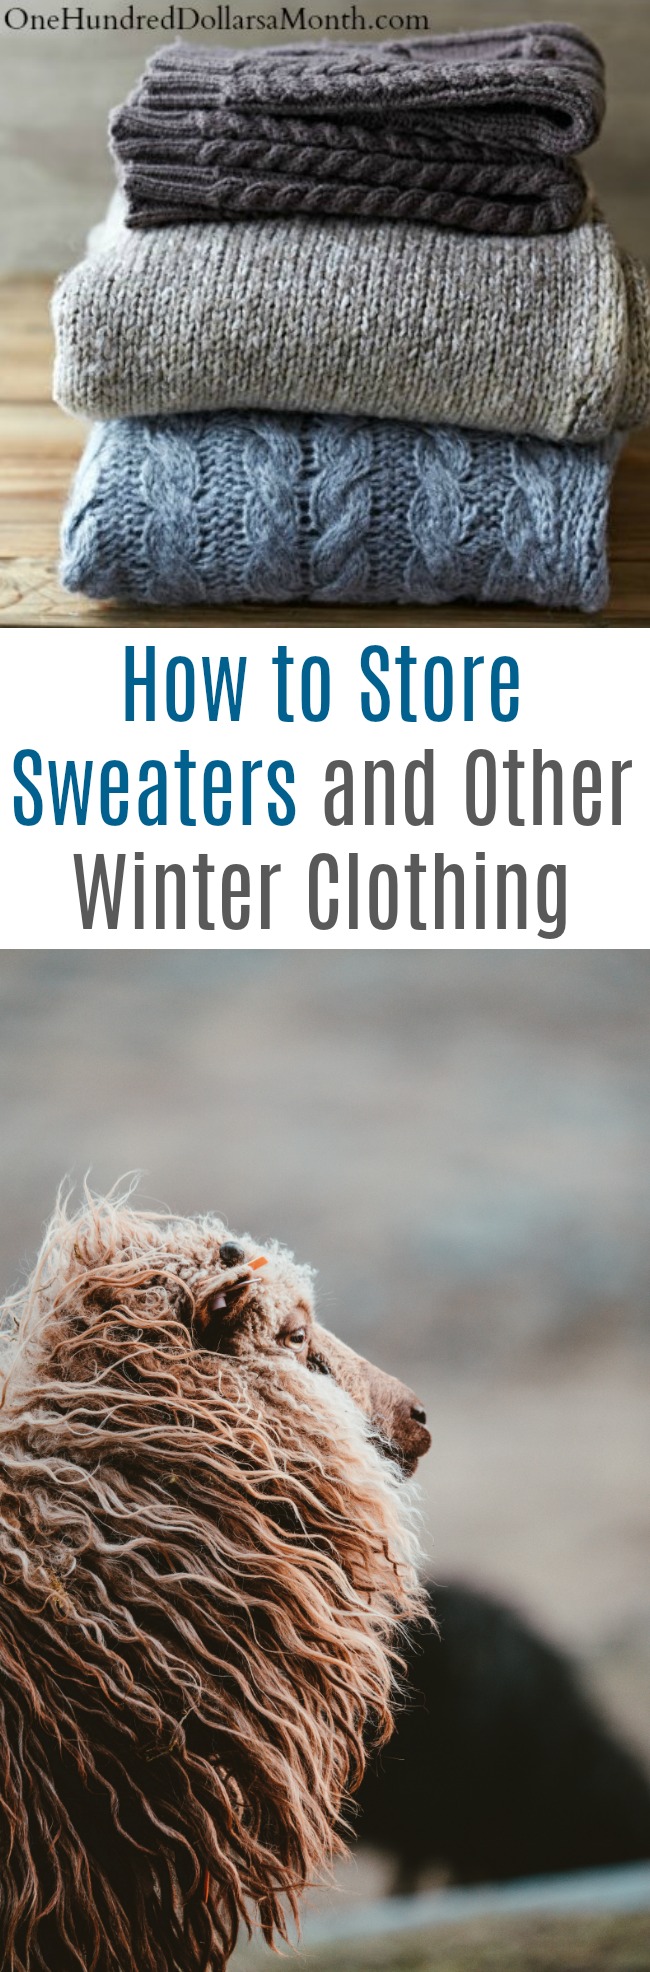 How to Store Sweaters and Other Winter Clothing